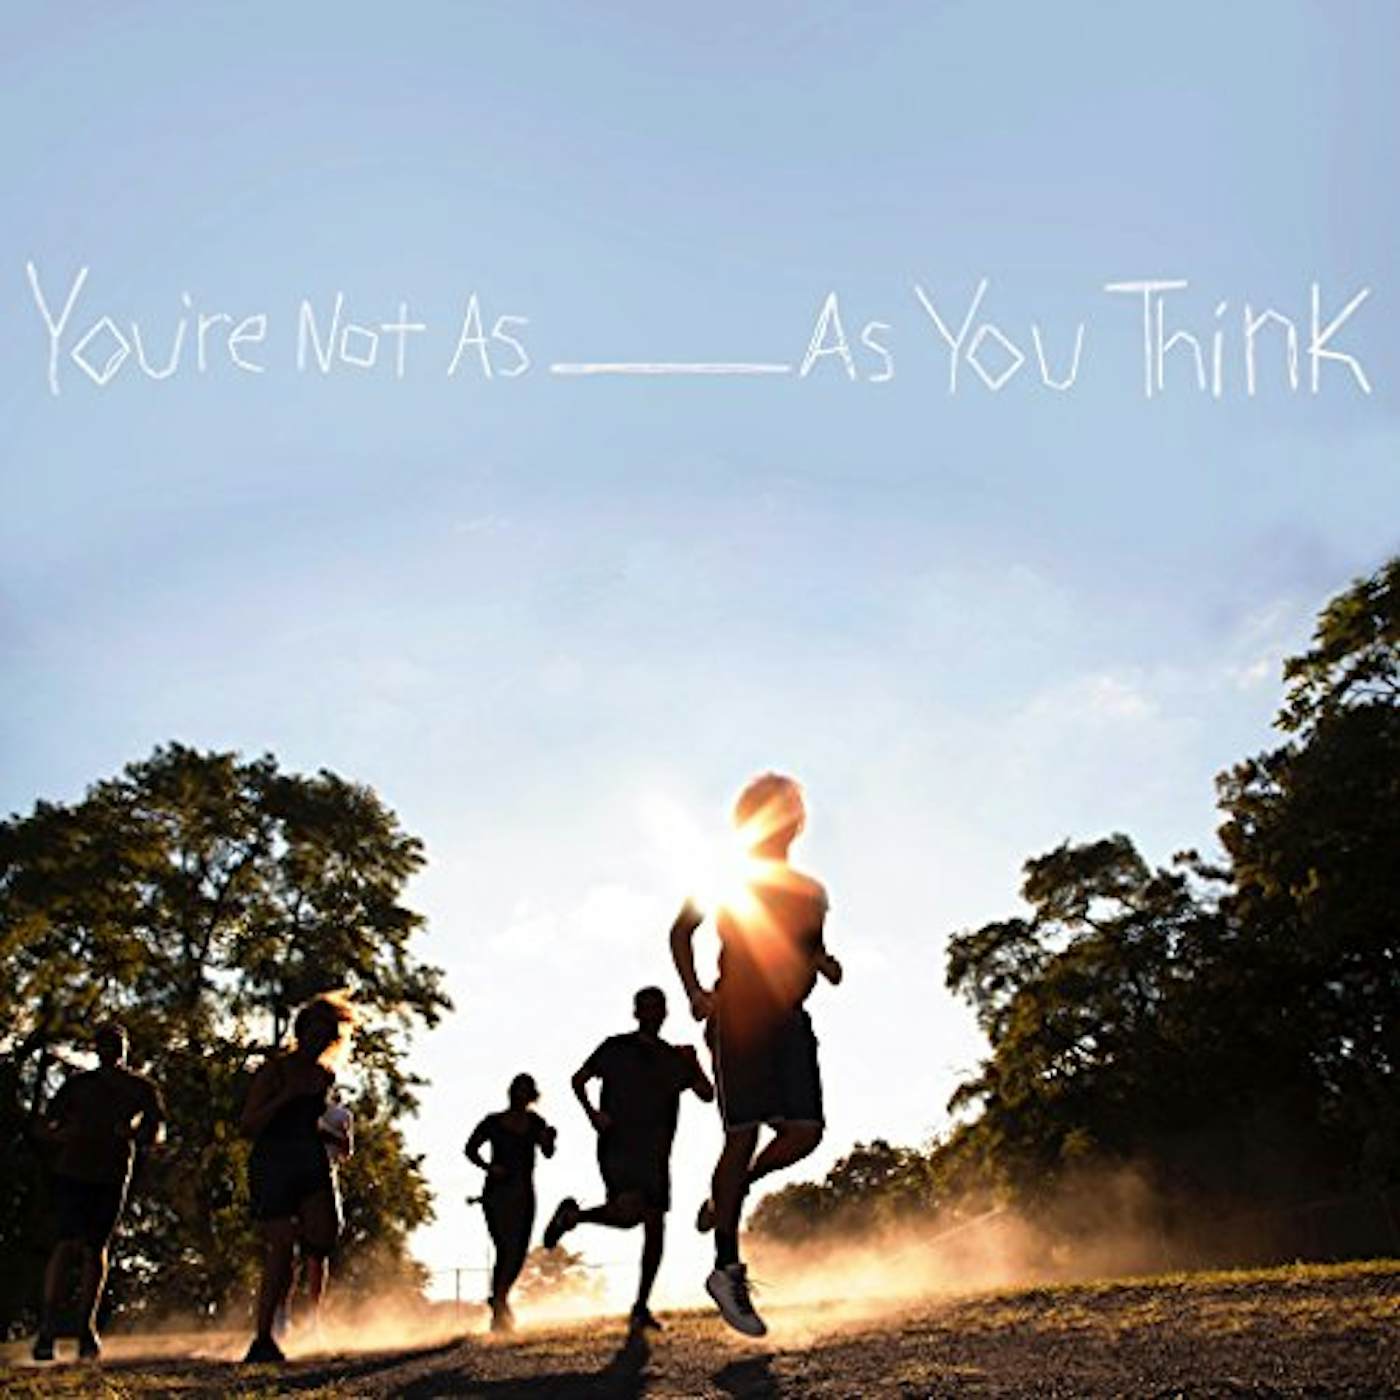 Sorority Noise YOU'RE NOT AS _ AS YOU THINK Vinyl Record